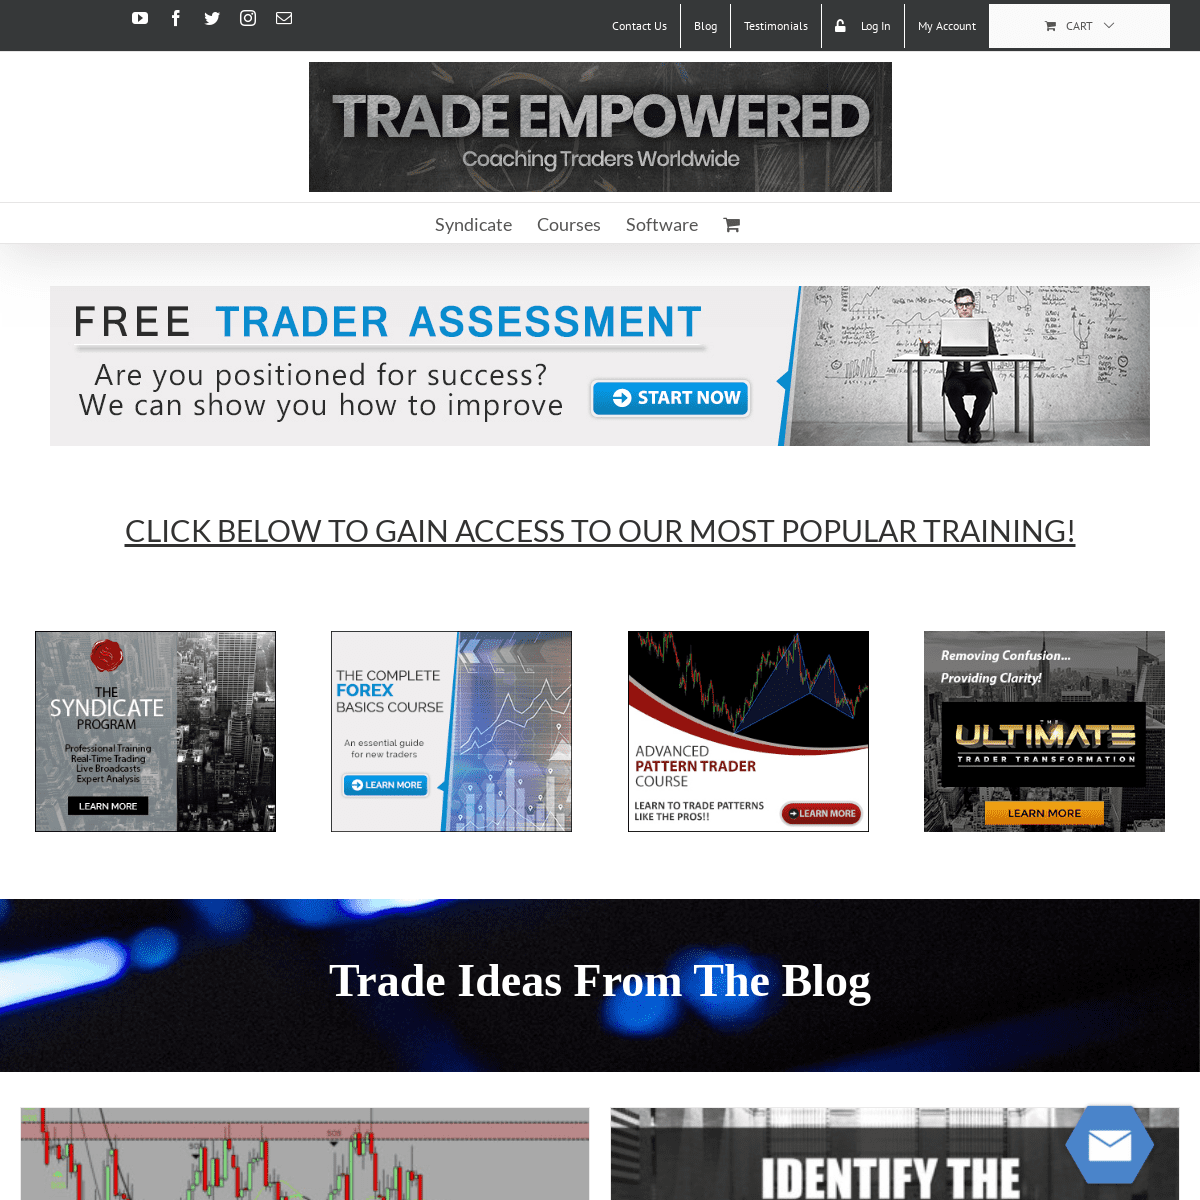 A complete backup of tradeempowered.com